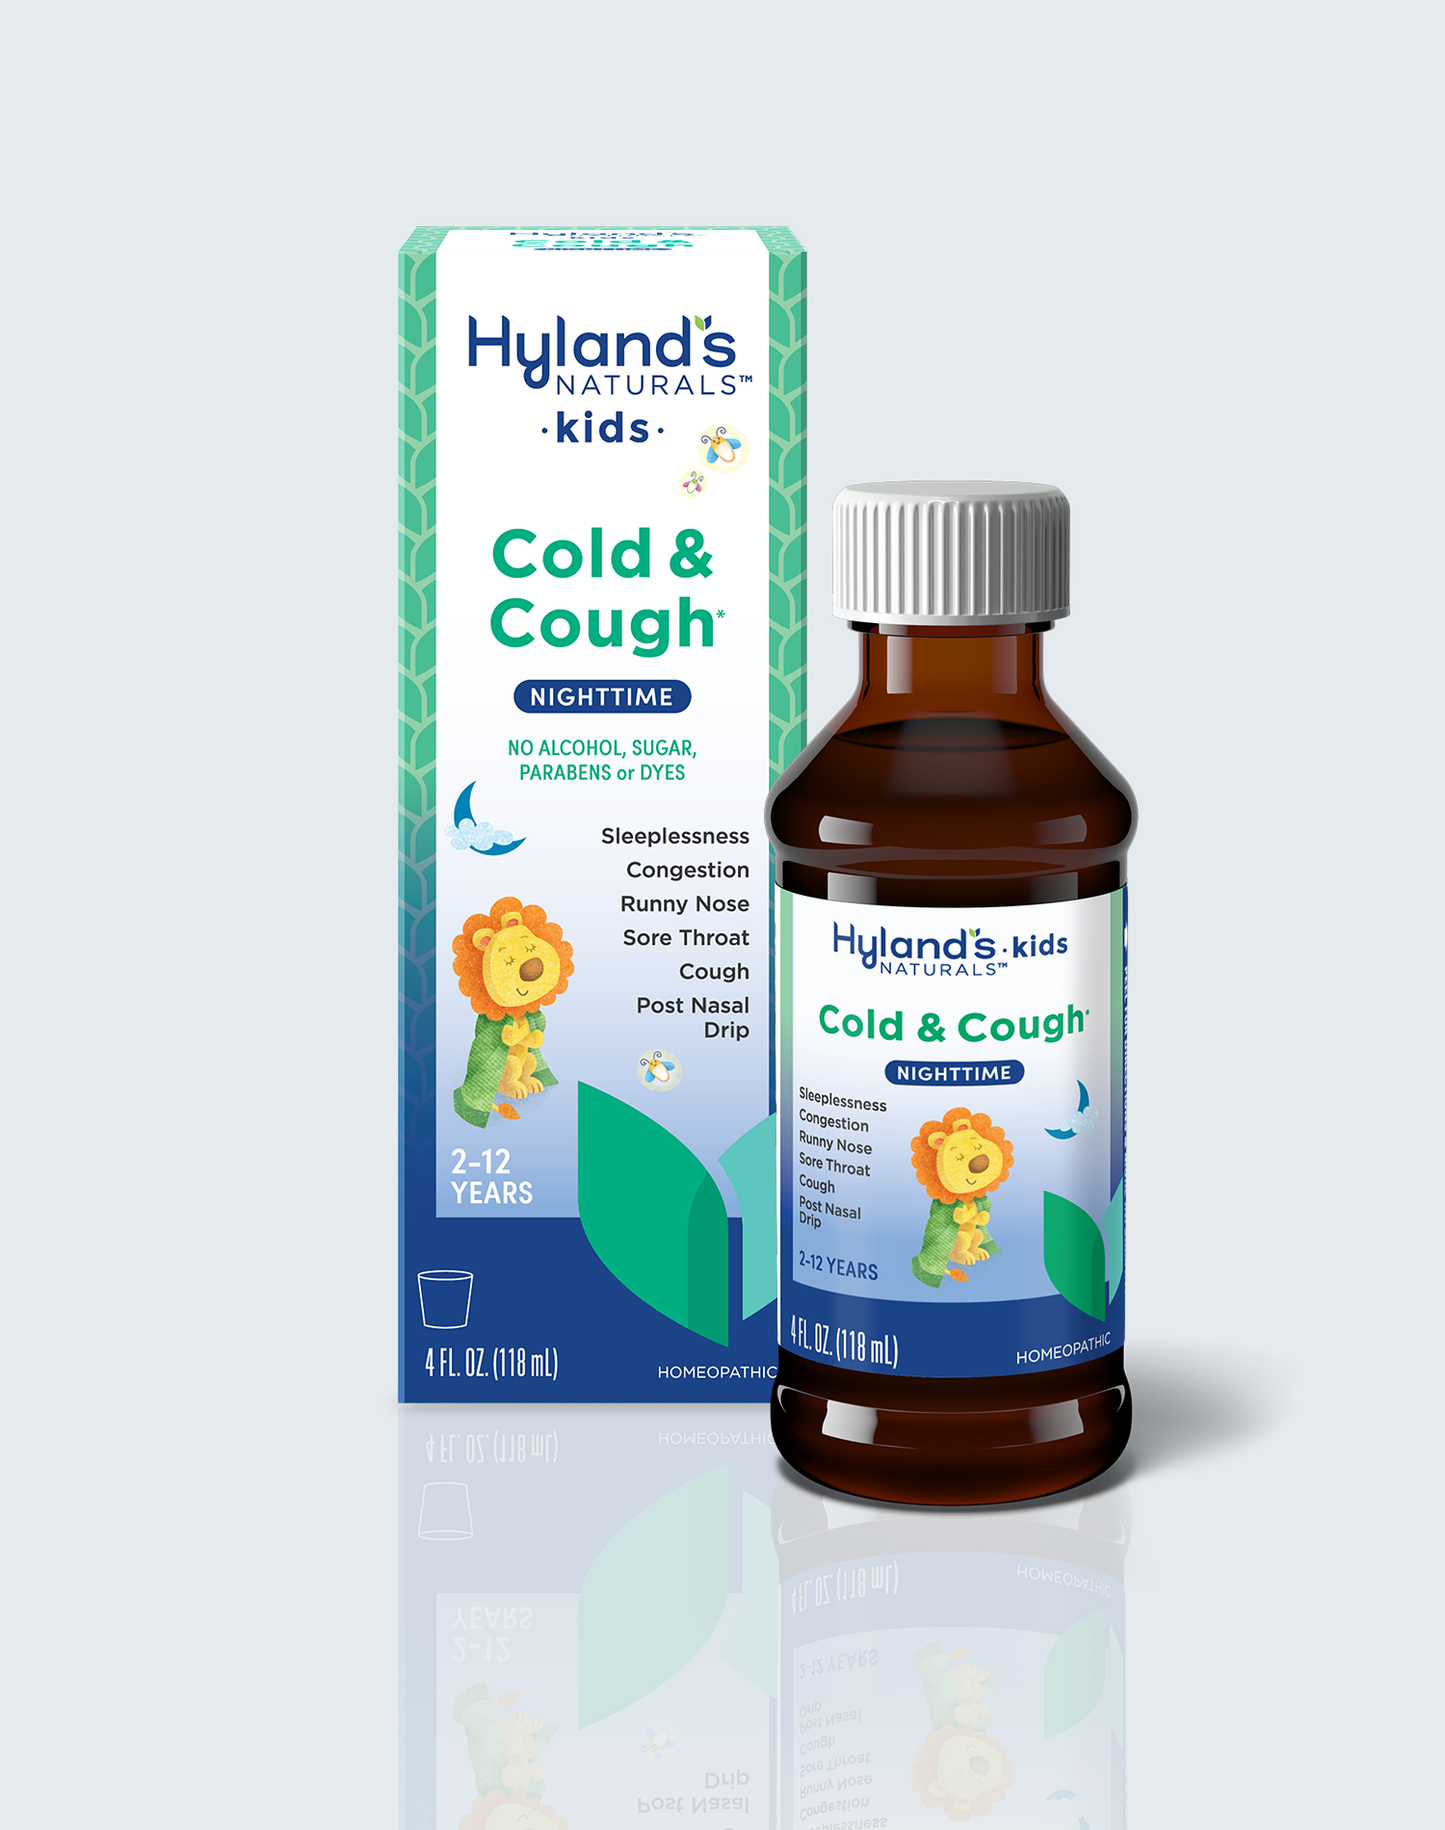 Cold & Cough Nighttime Packaging